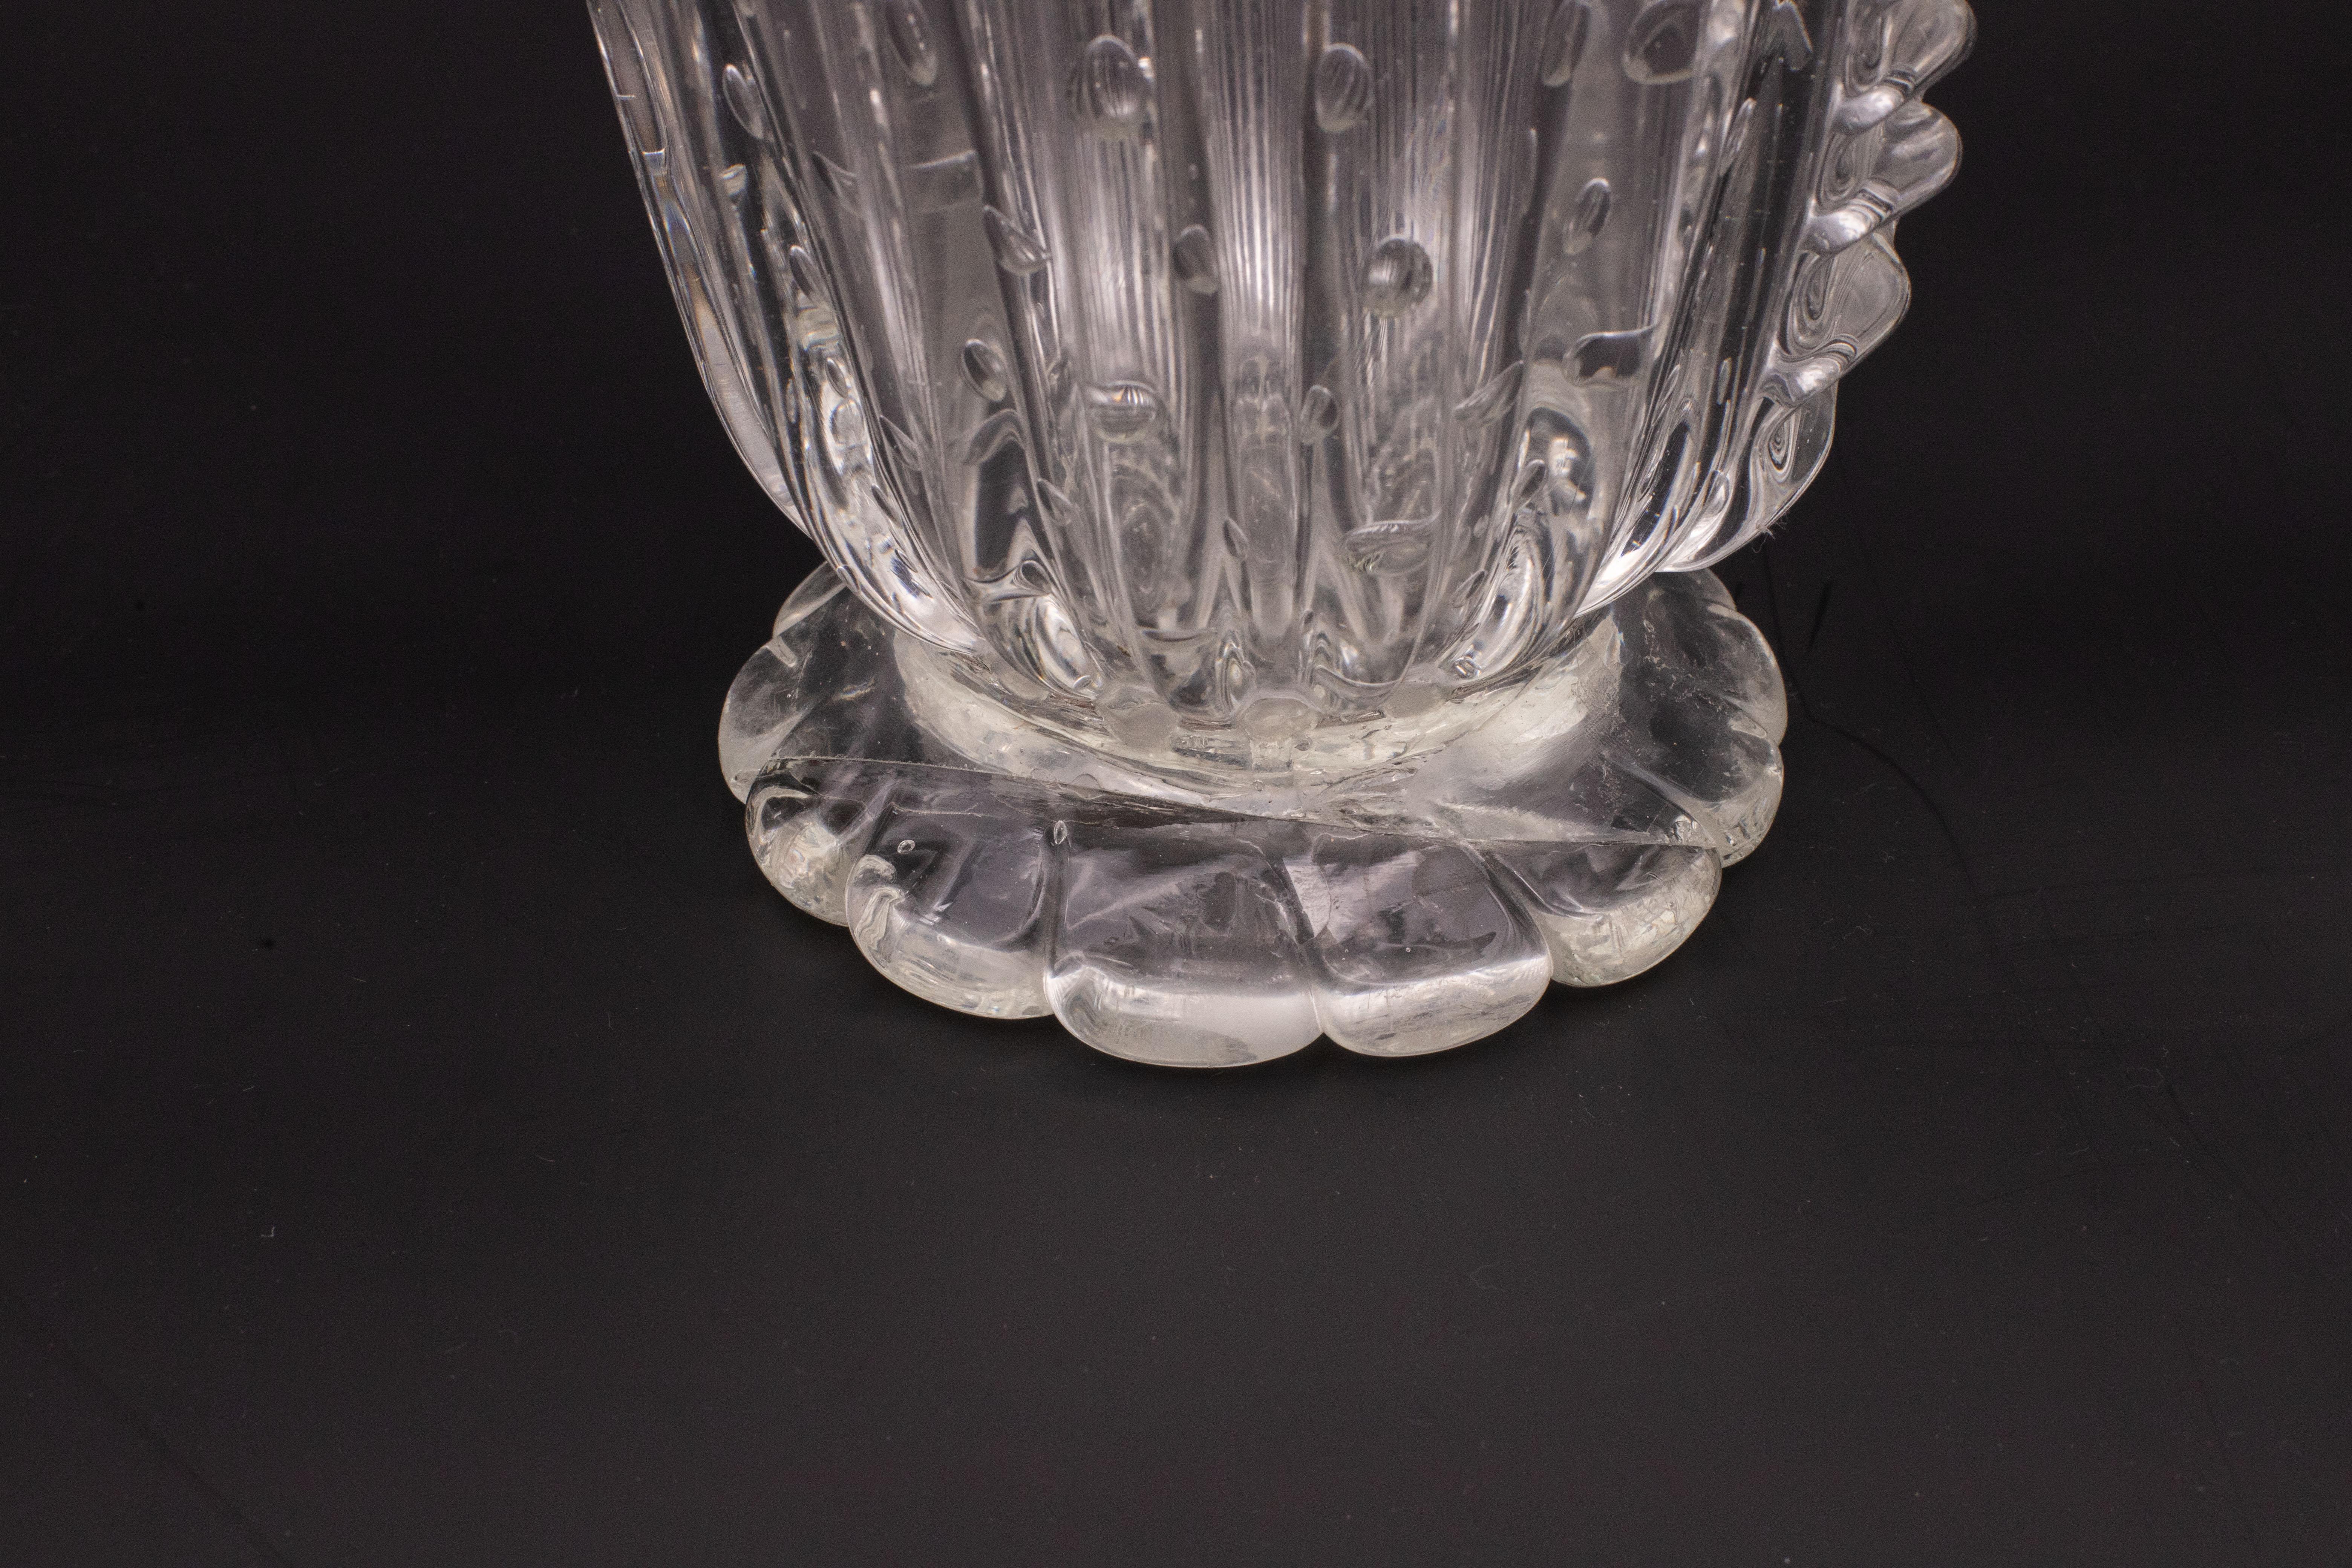 Art Decò Large Size Murano Bullicante Vase by Barovier & Toso, 1930s For Sale 7